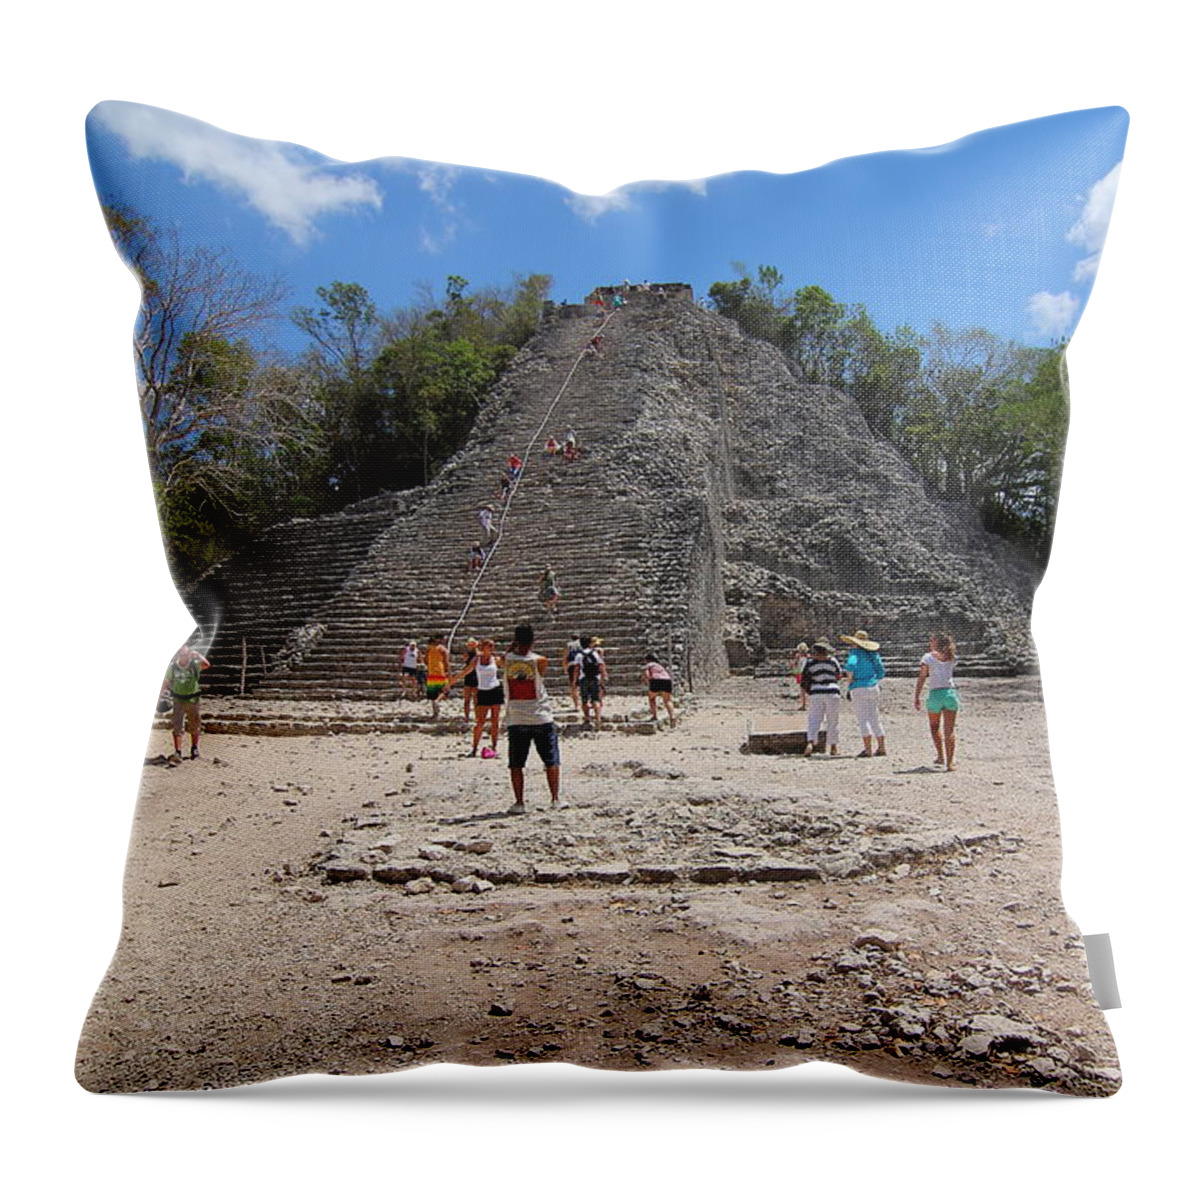 Landscape Throw Pillow featuring the photograph Coba Archeological Site, Mexico by Robert McKinstry